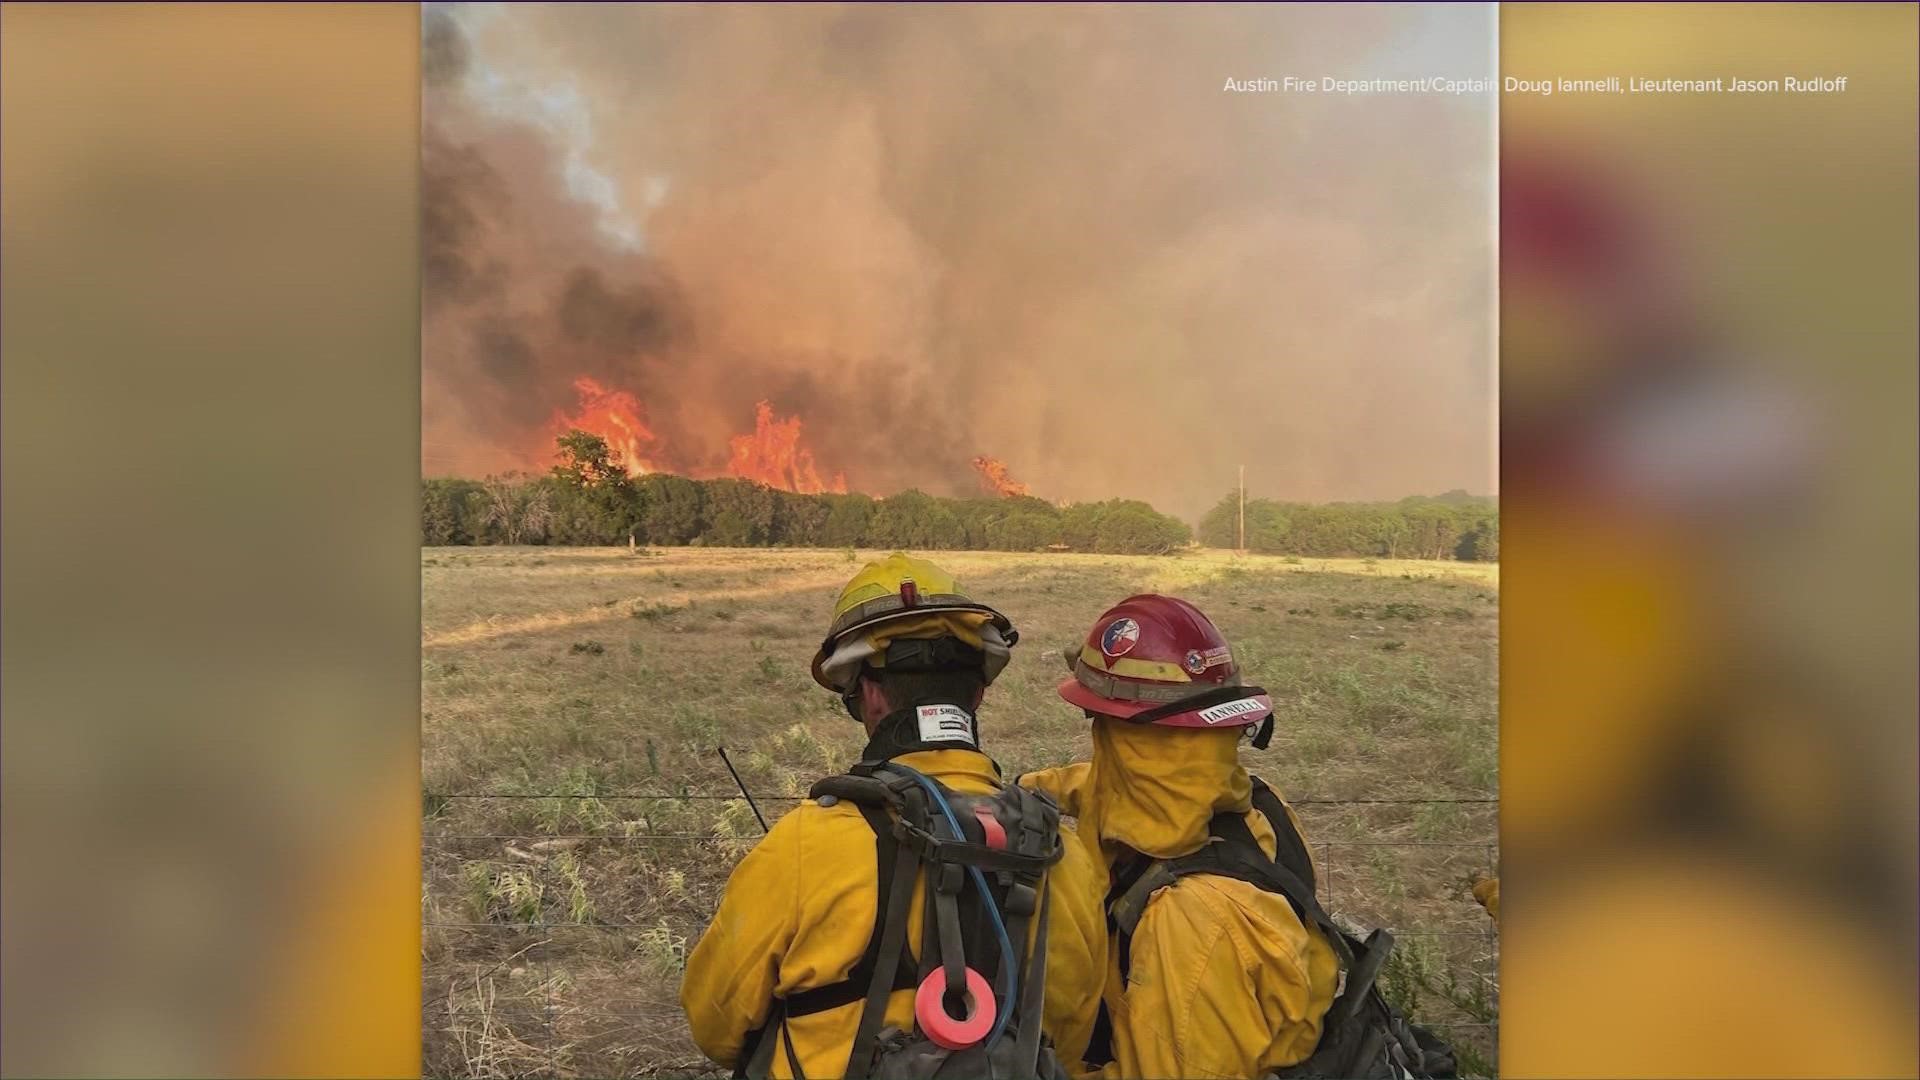 A crew of four is out just west of the DFW to help battle the flames as they threaten homes and farms in the area.